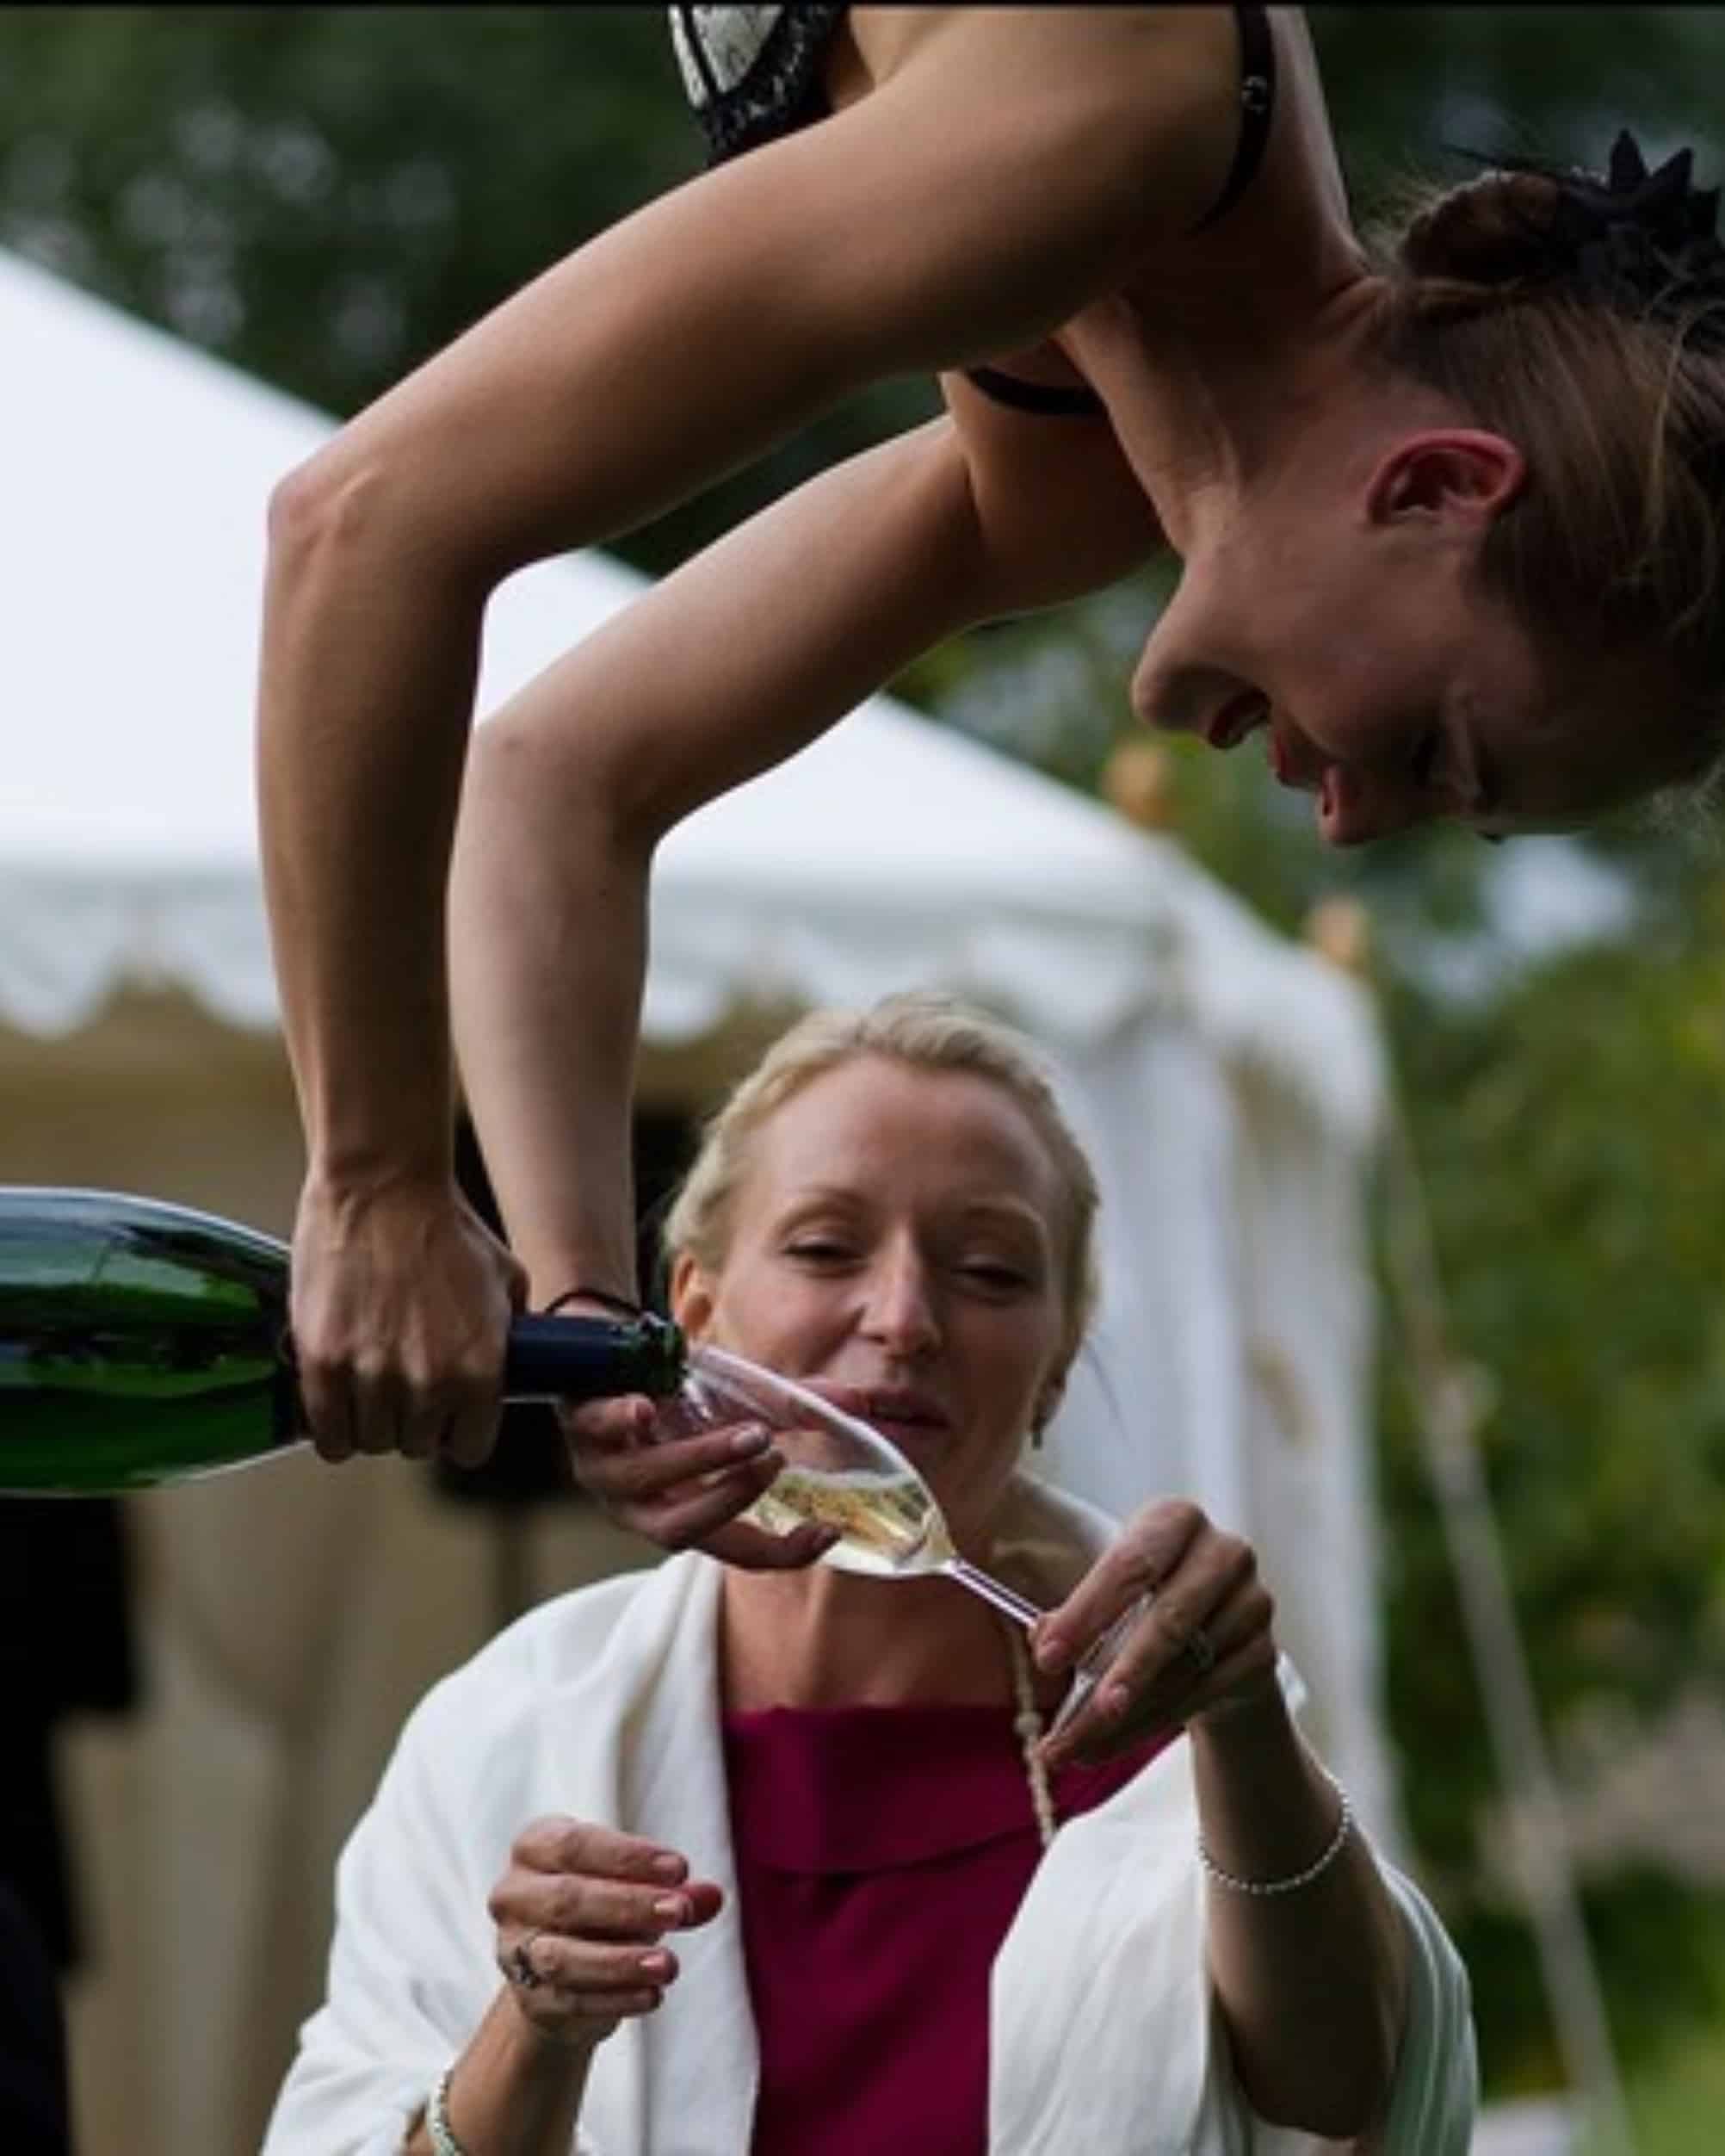 Aerial artist pouring champagne